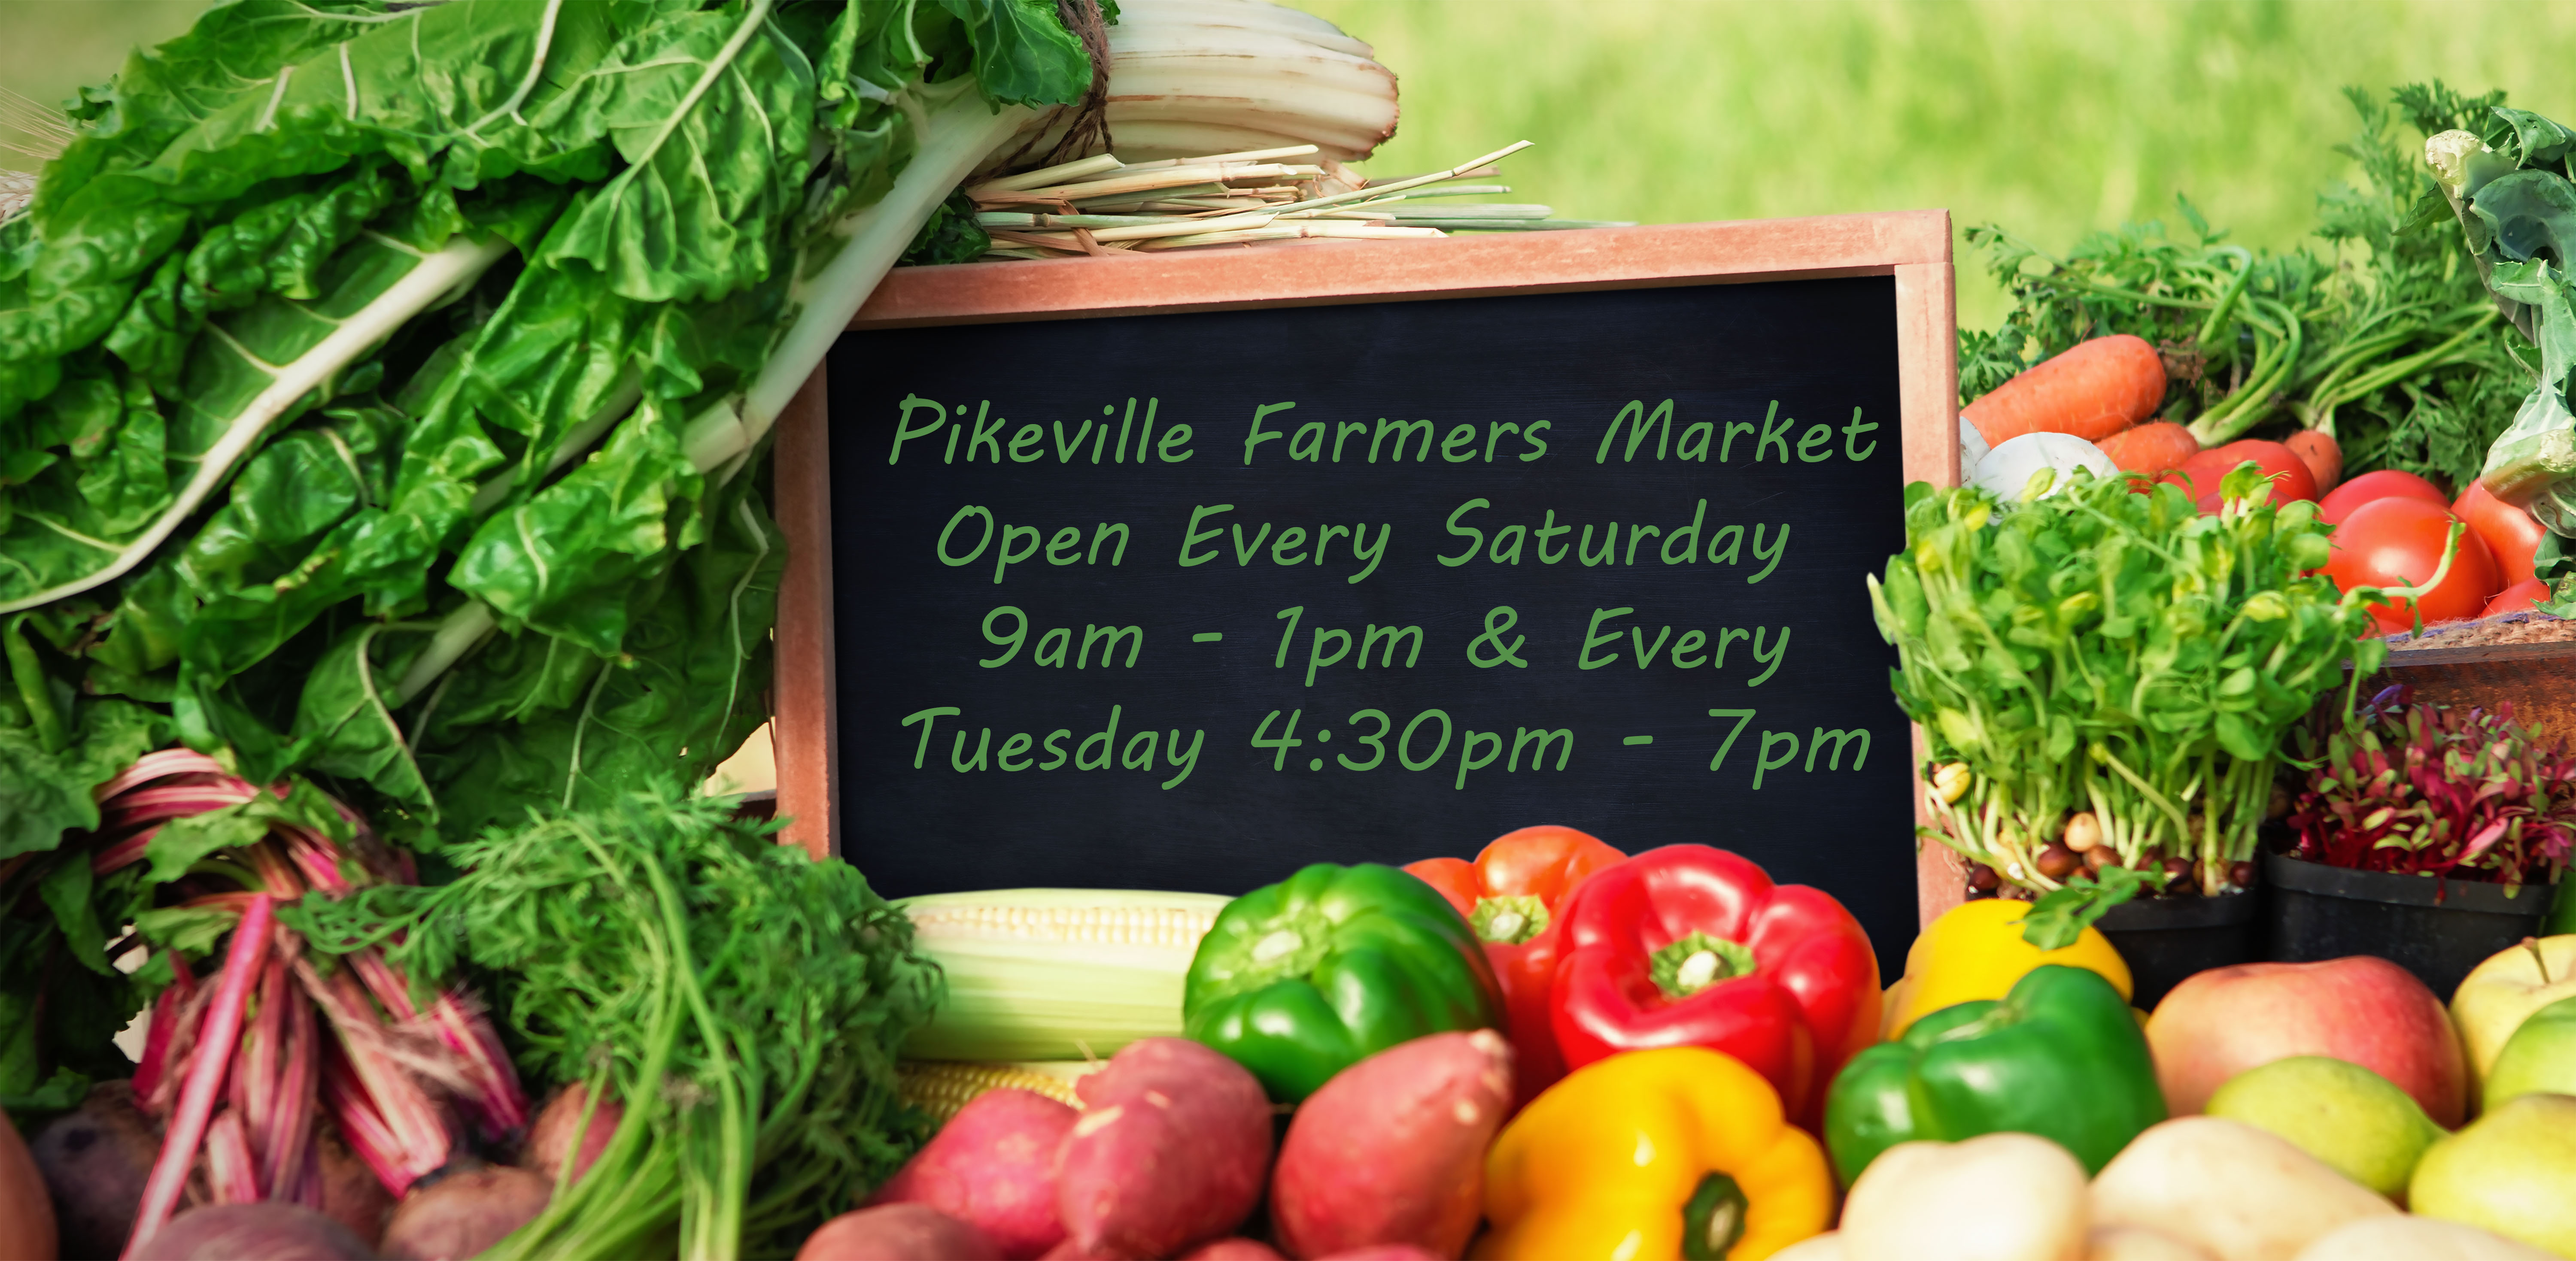 Pikeville Farmers Market Hours